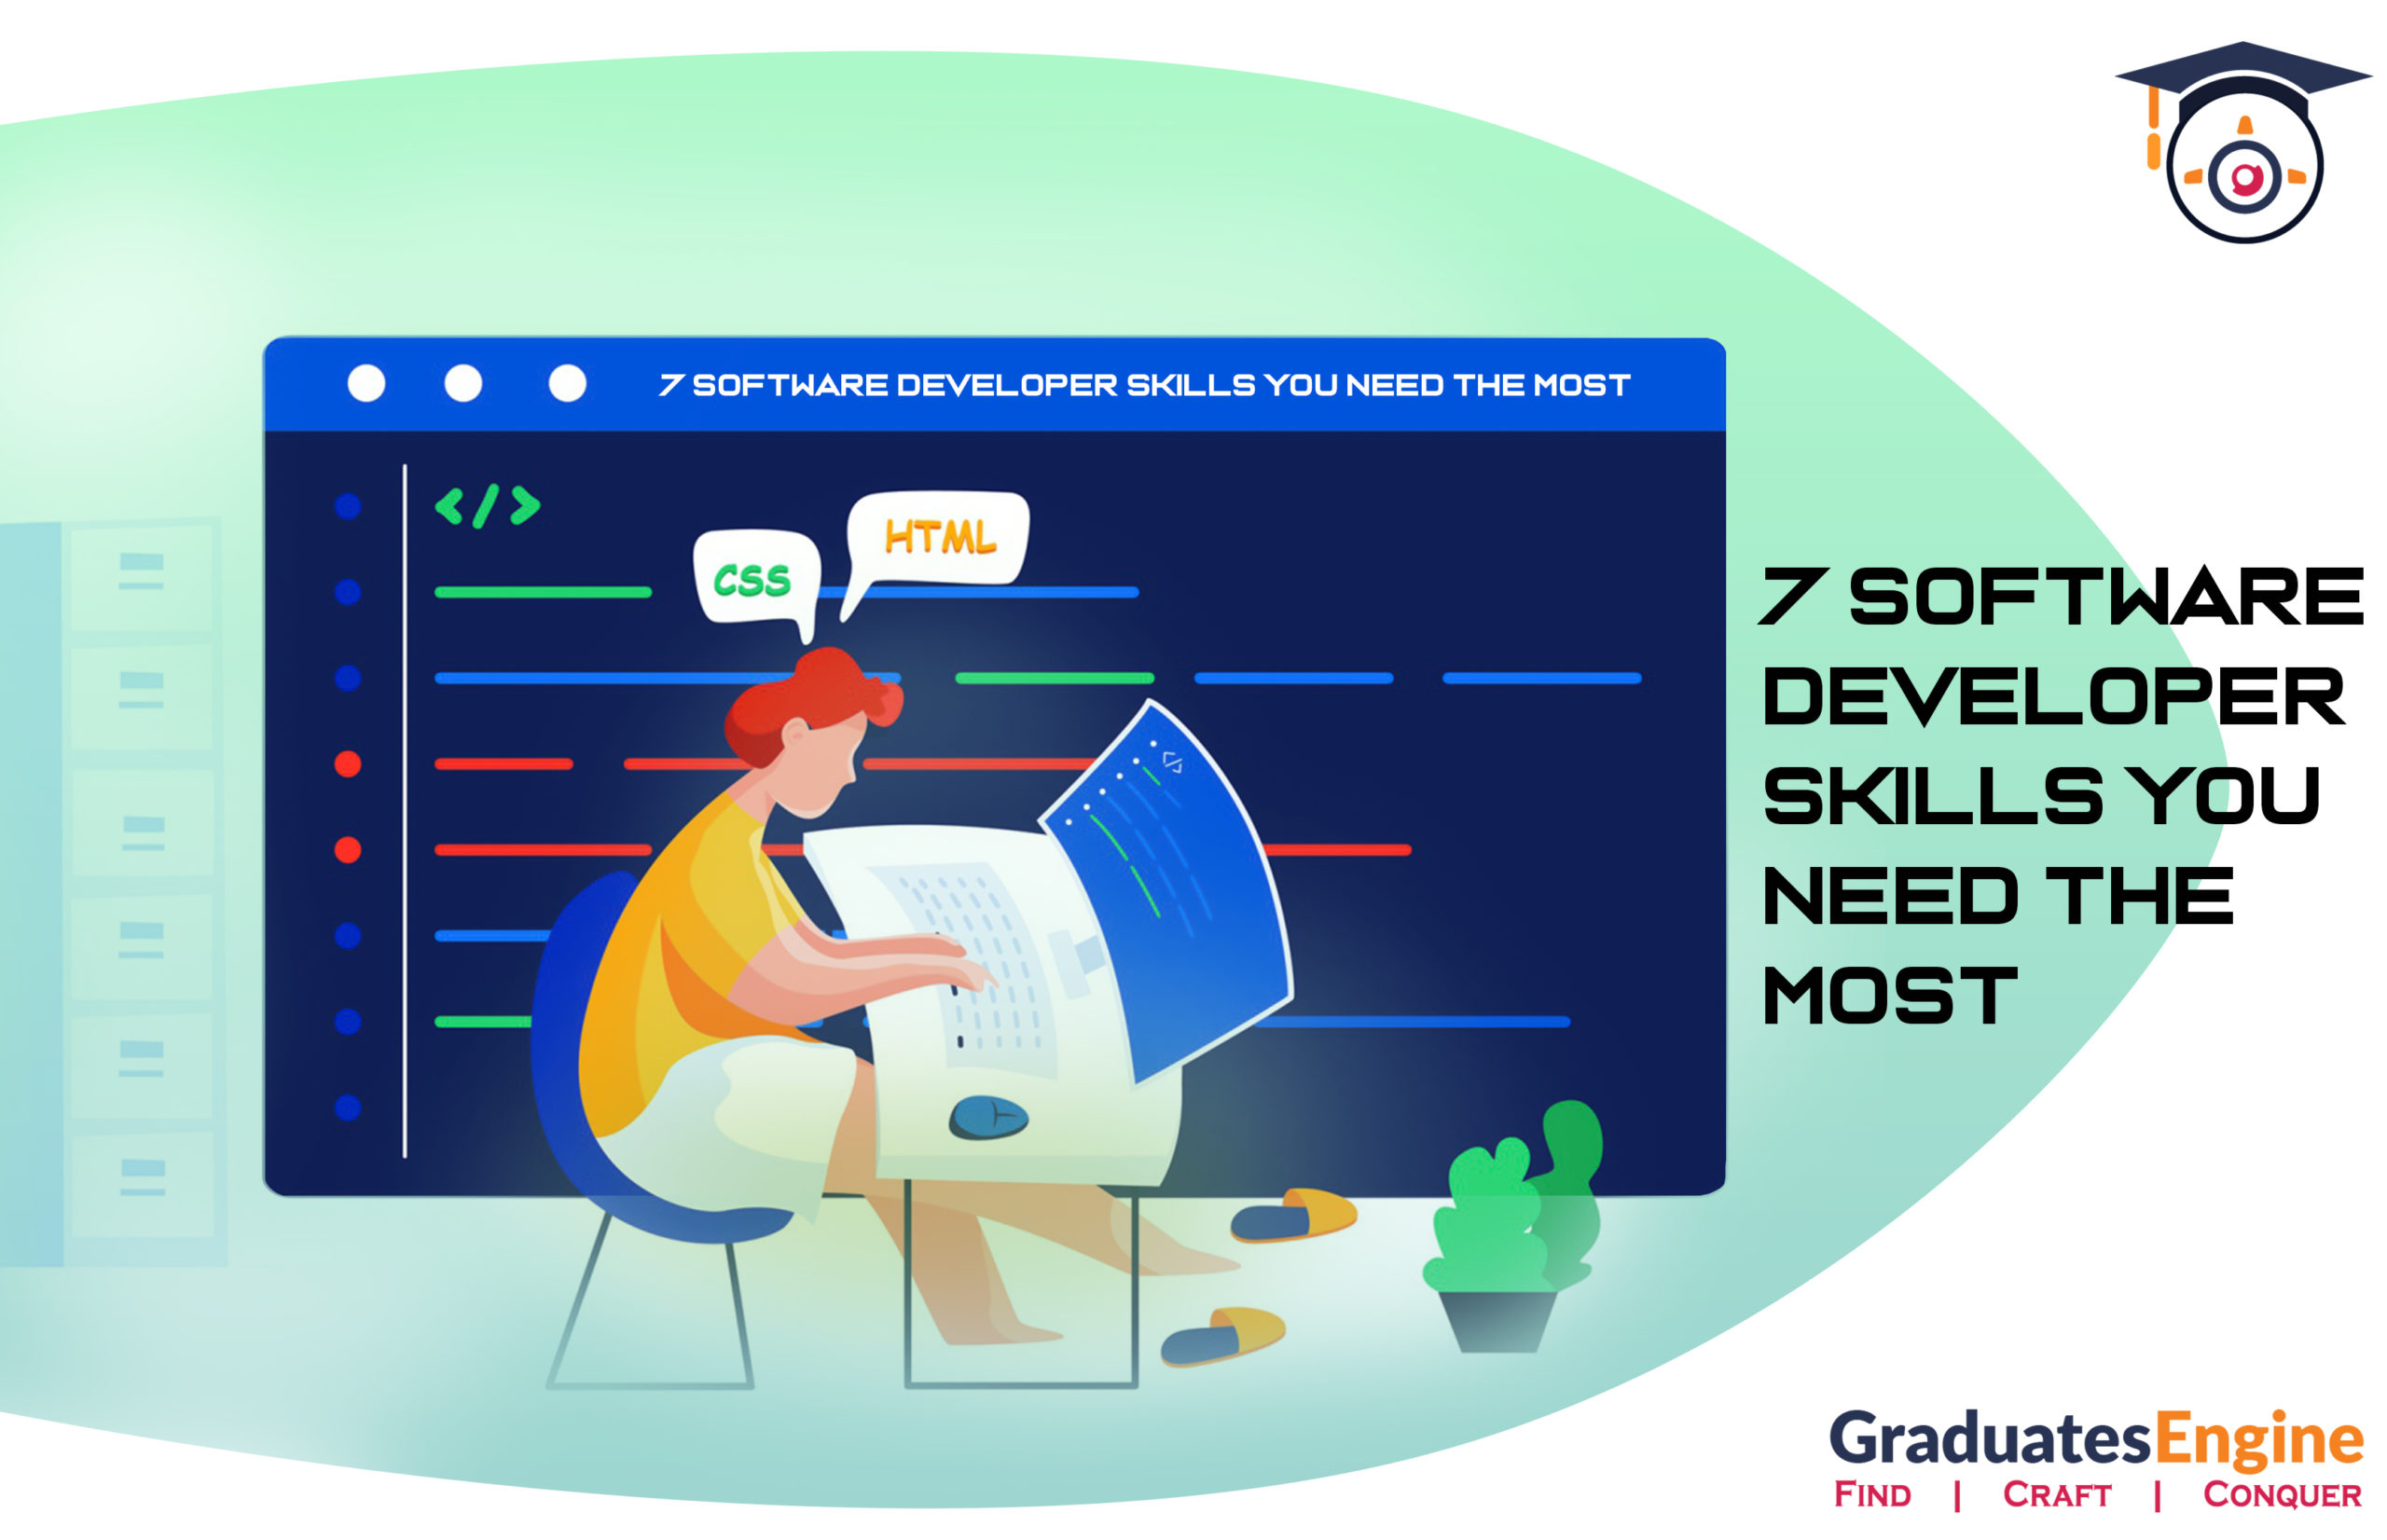 Software Developer Skills You Need the Most in 2020